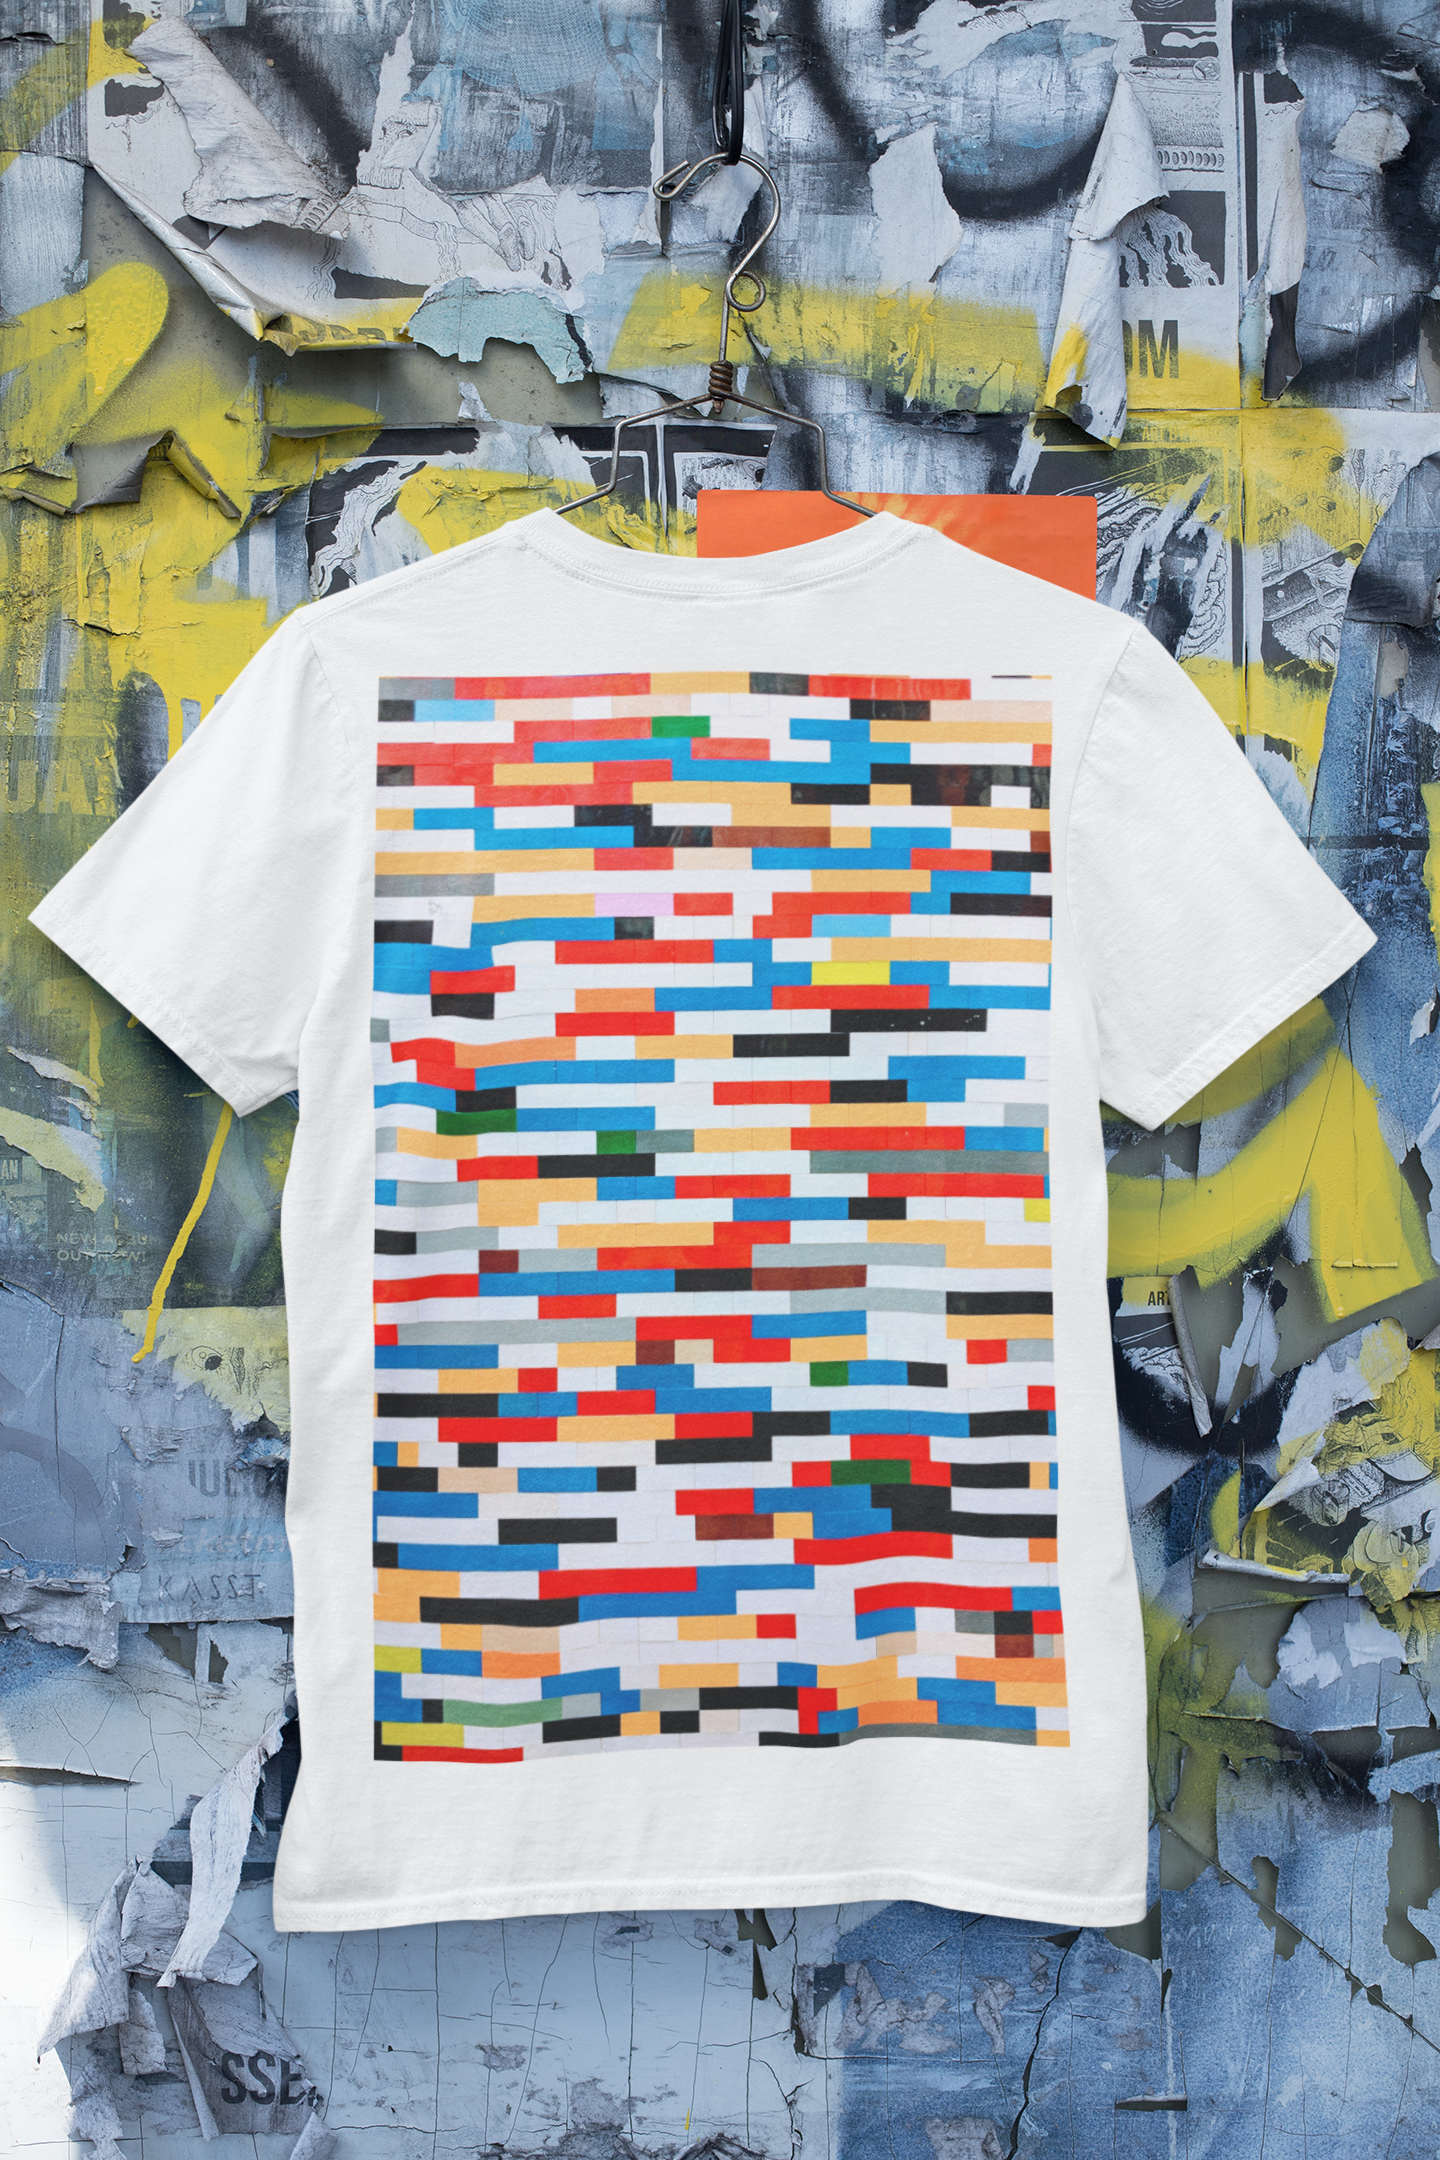 https://mckups.com/wp-content/uploads/2021/06/mockup-of-a-t-shirt-hanging-on-a-wall-with-old-posters-and-graffiti-m431.png